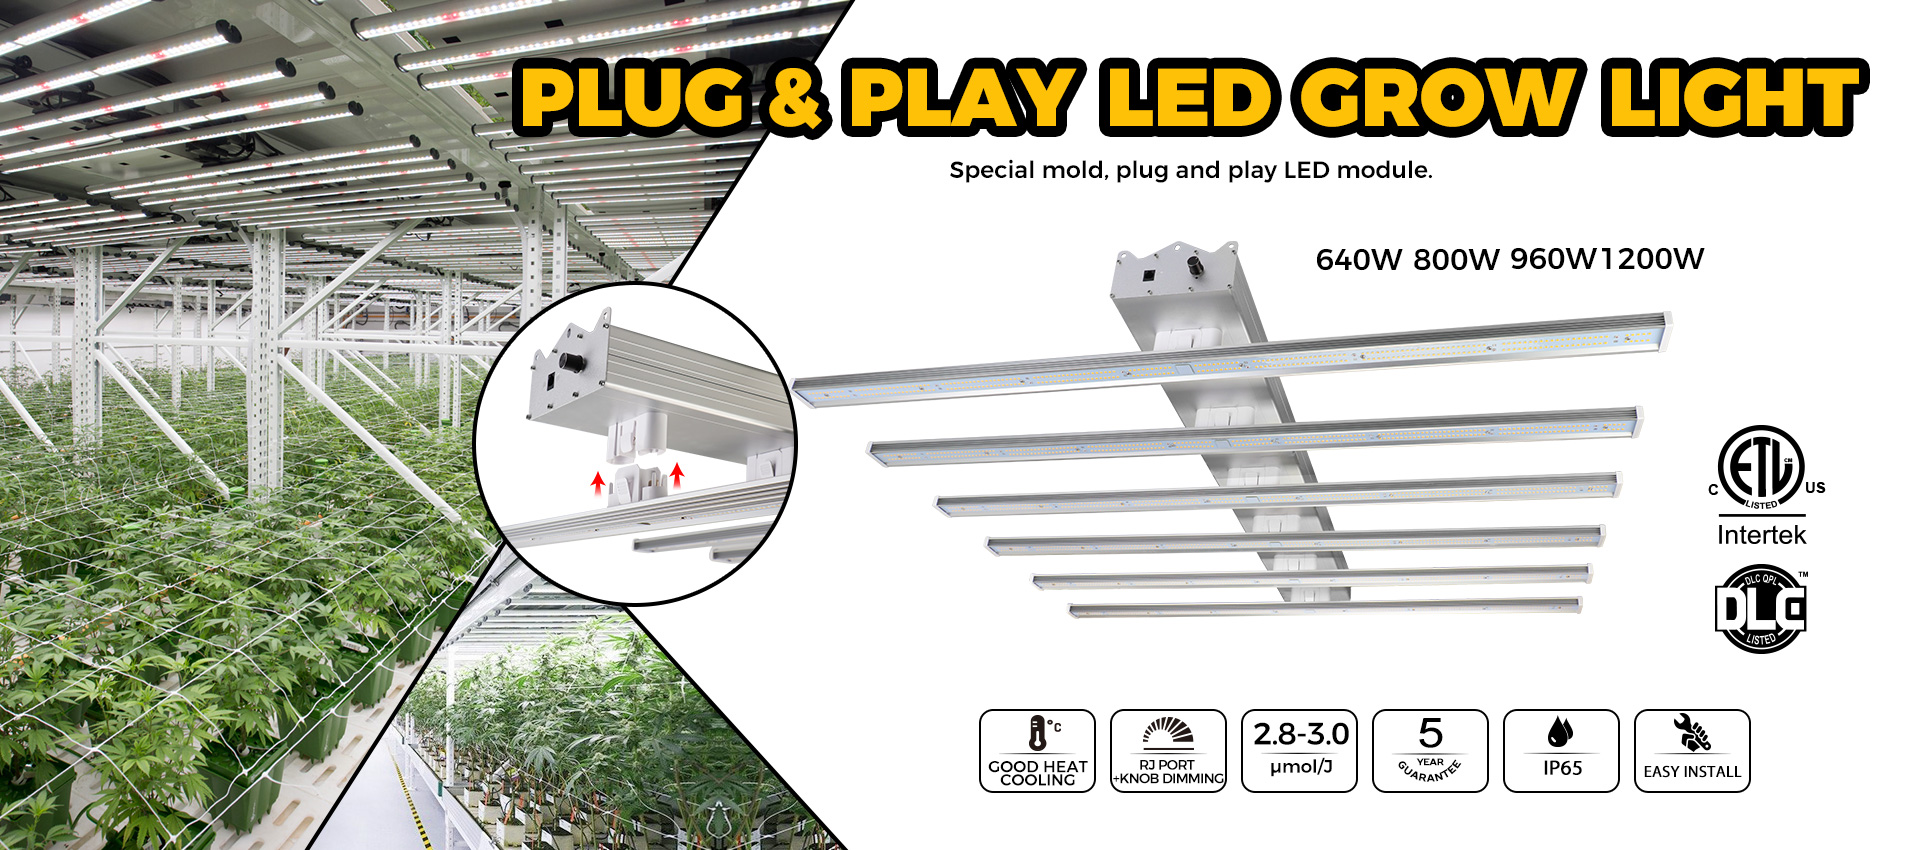 How to choose the best led grow light for plants?